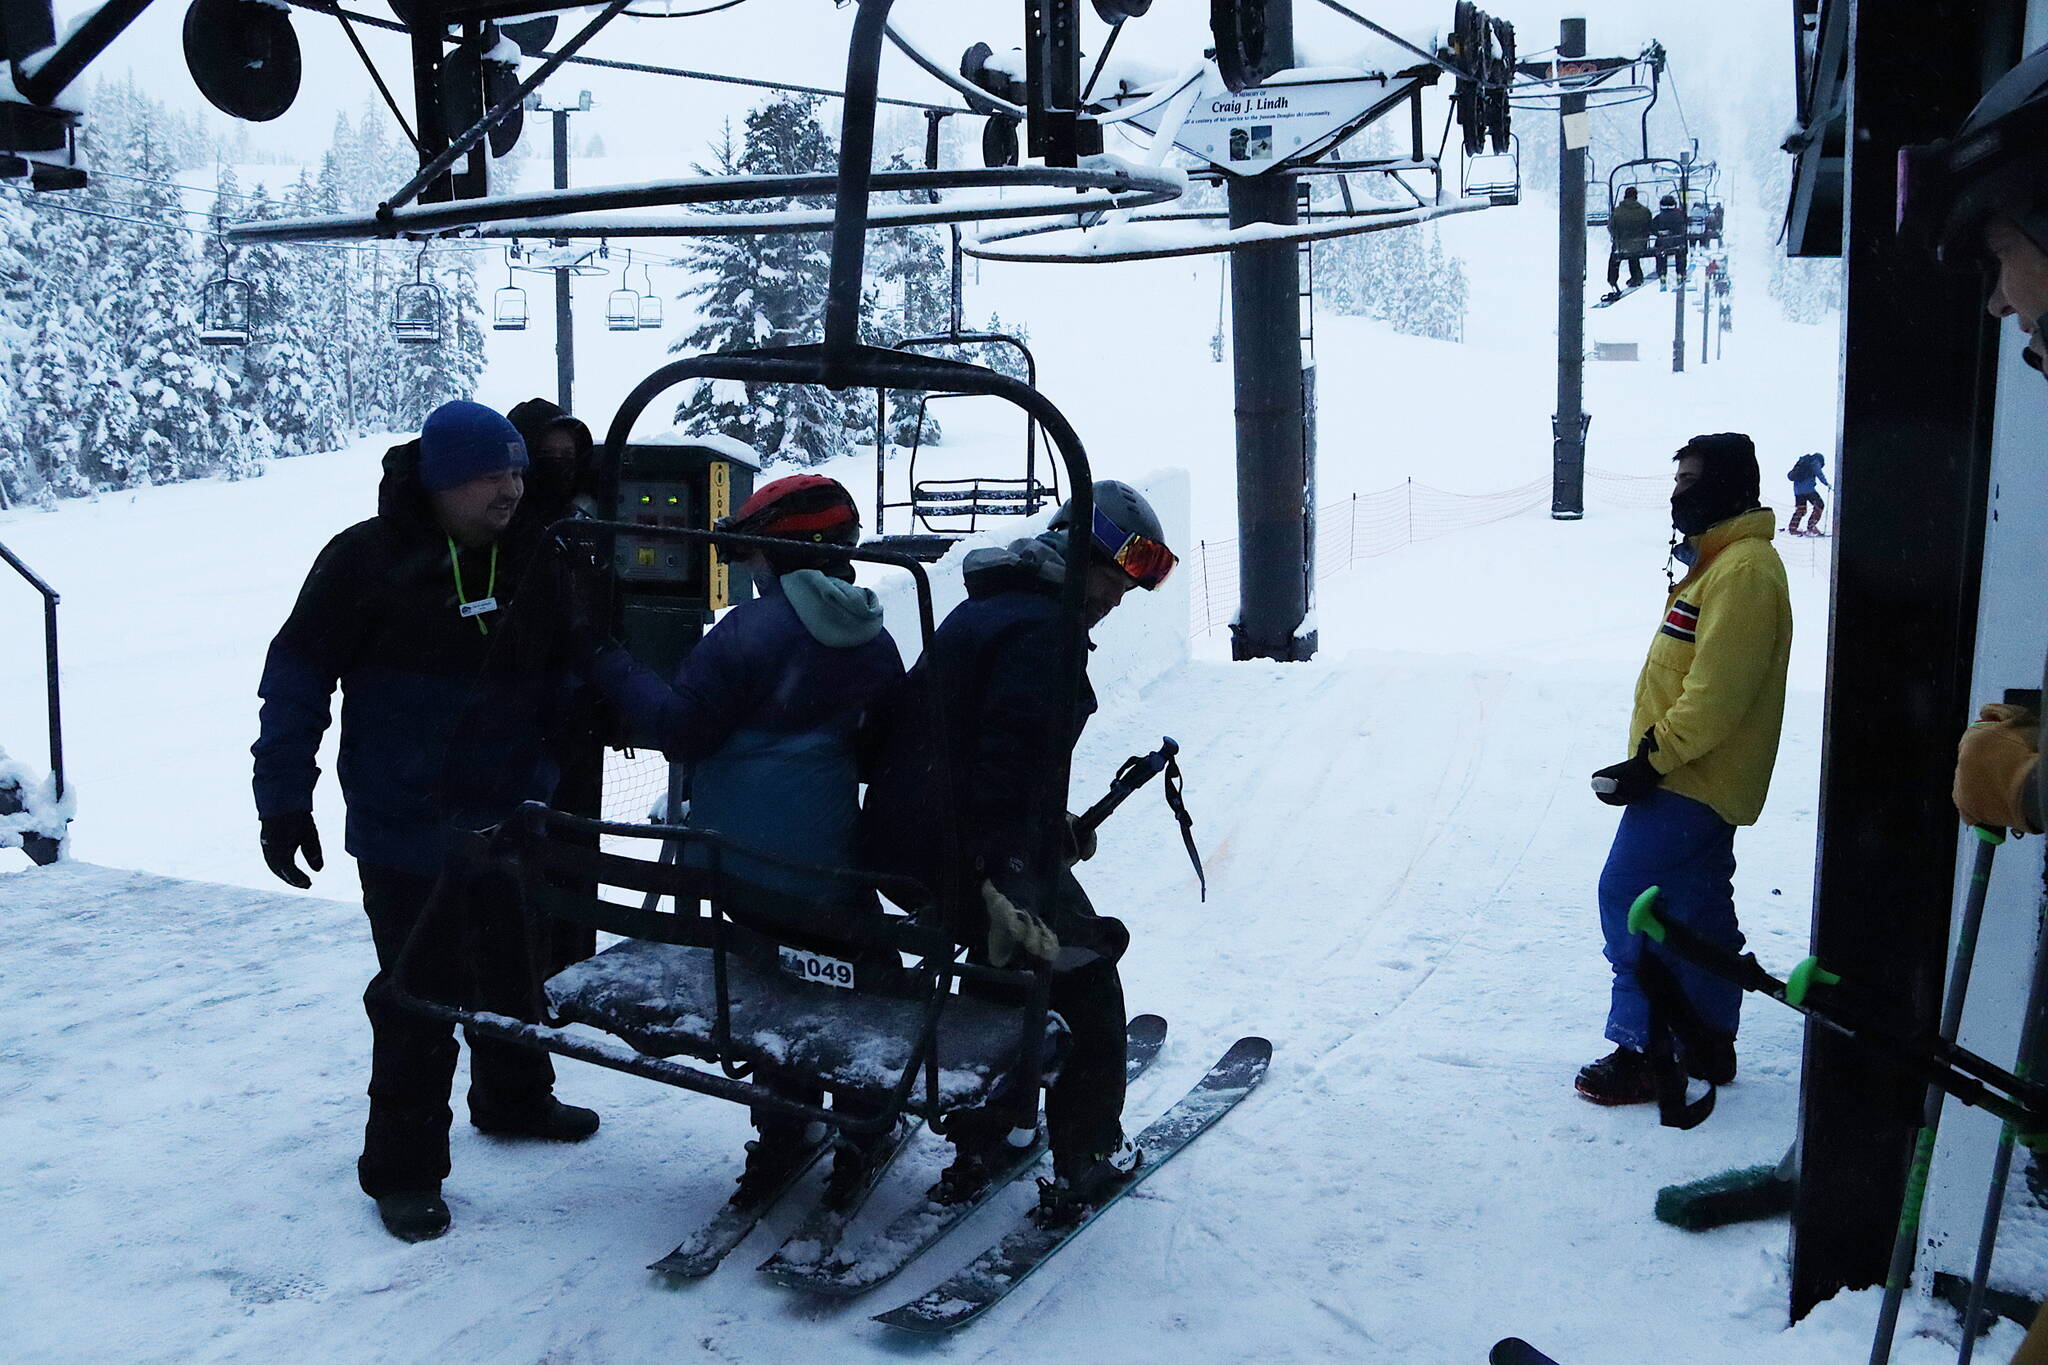 A pair of skiers are among the first to board the Ptarmigan lift on the first day of the 2023-24 season at Eaglecrest Ski Area shortly after 9 a.m. Wednesday. (Mark Sabbatini / Juneau Empire)